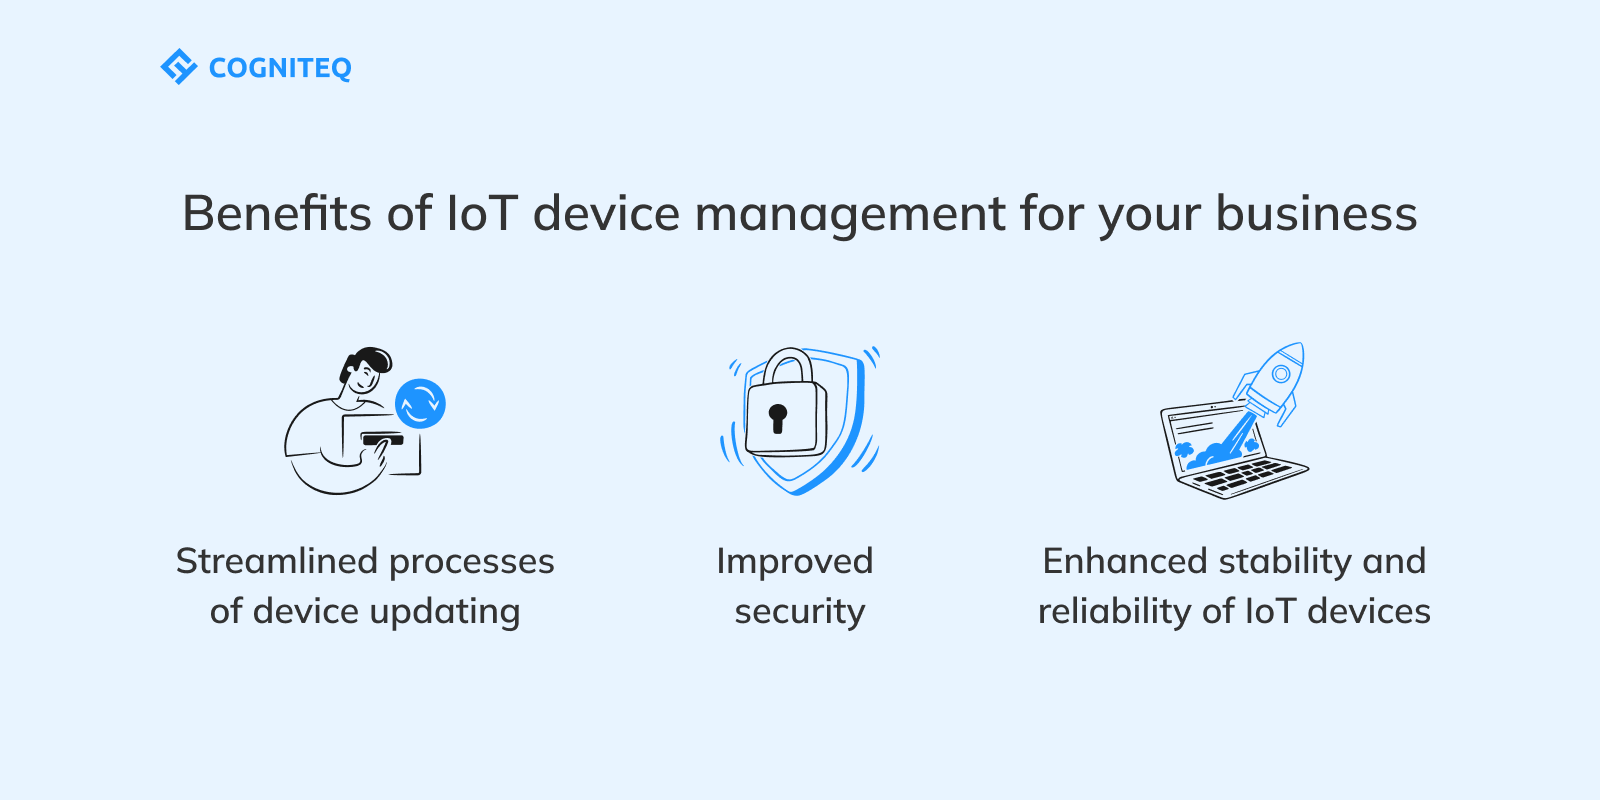 Benefits of IoT device management for your business